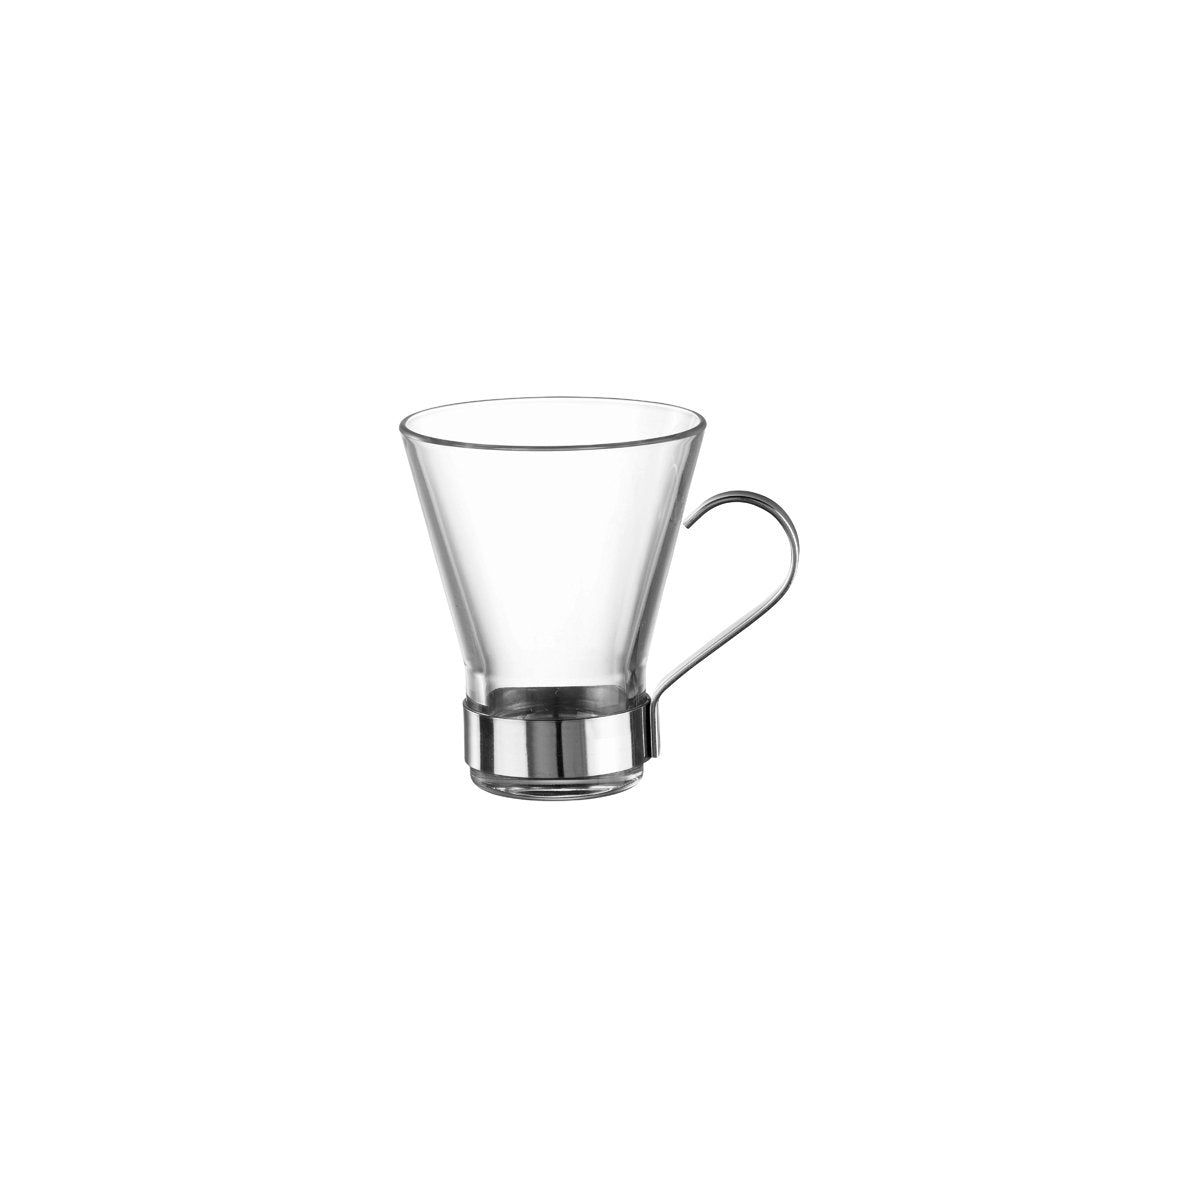 310-255 Bormioli Rocco Ypsilon Cappuccino Cup 220ml With Stainless Steel Handle Tomkin Australia Hospitality Supplies